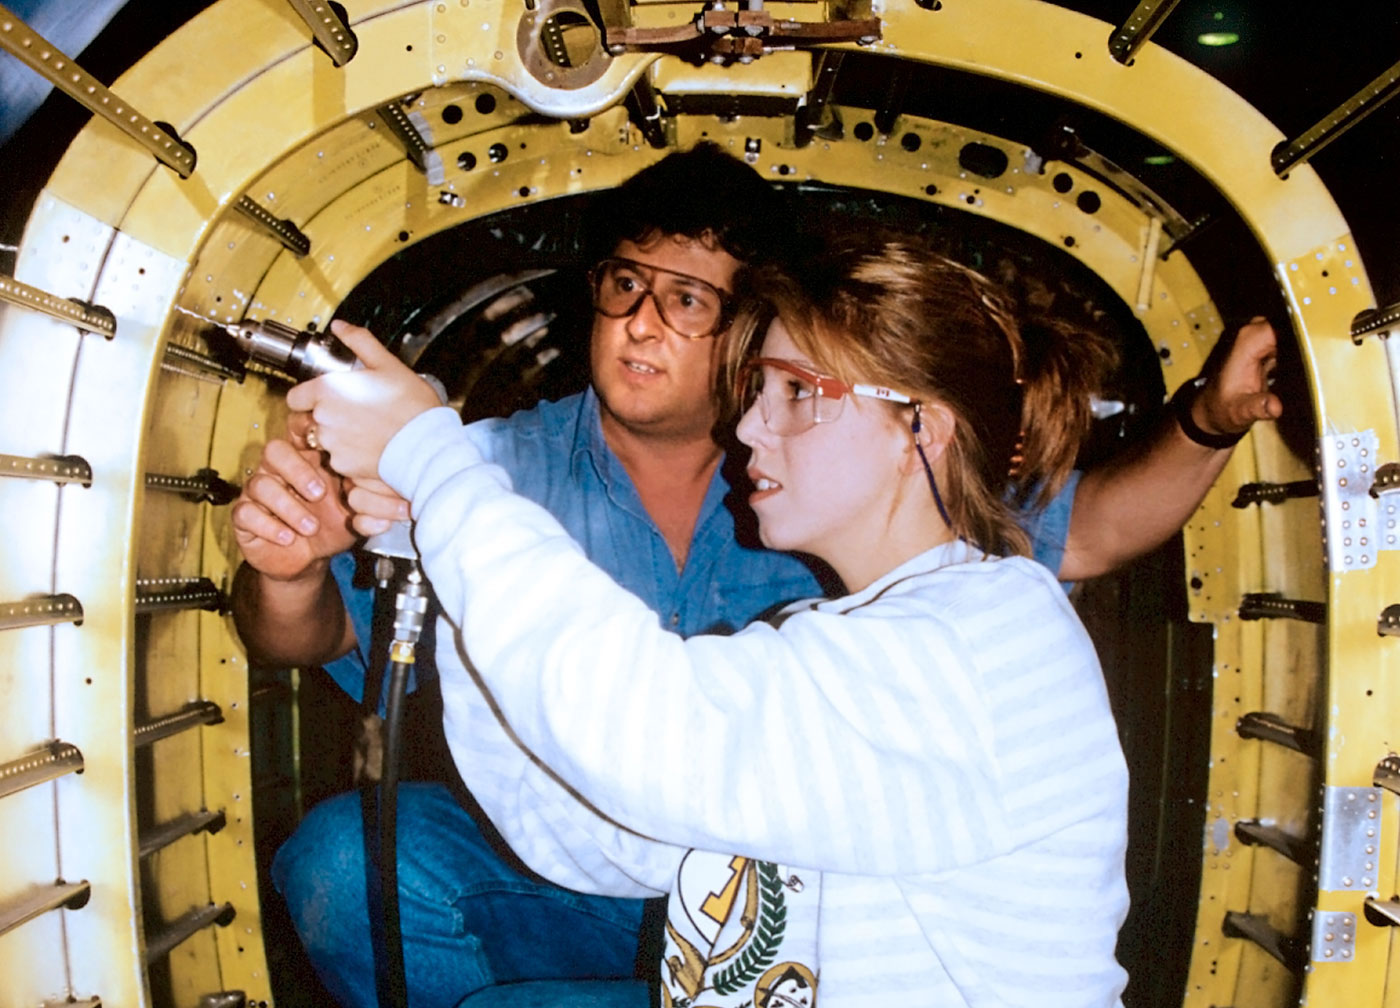 A young female intern operating a tool while a supervisor guides her.